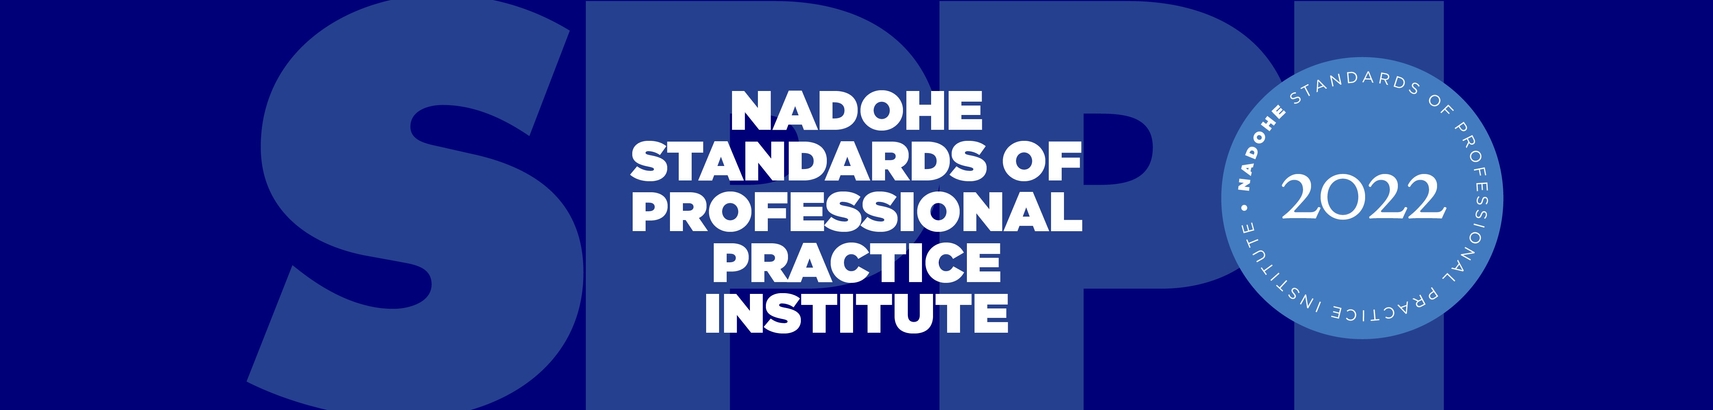 2022 NADOHE Standards of Professional Practice Institute